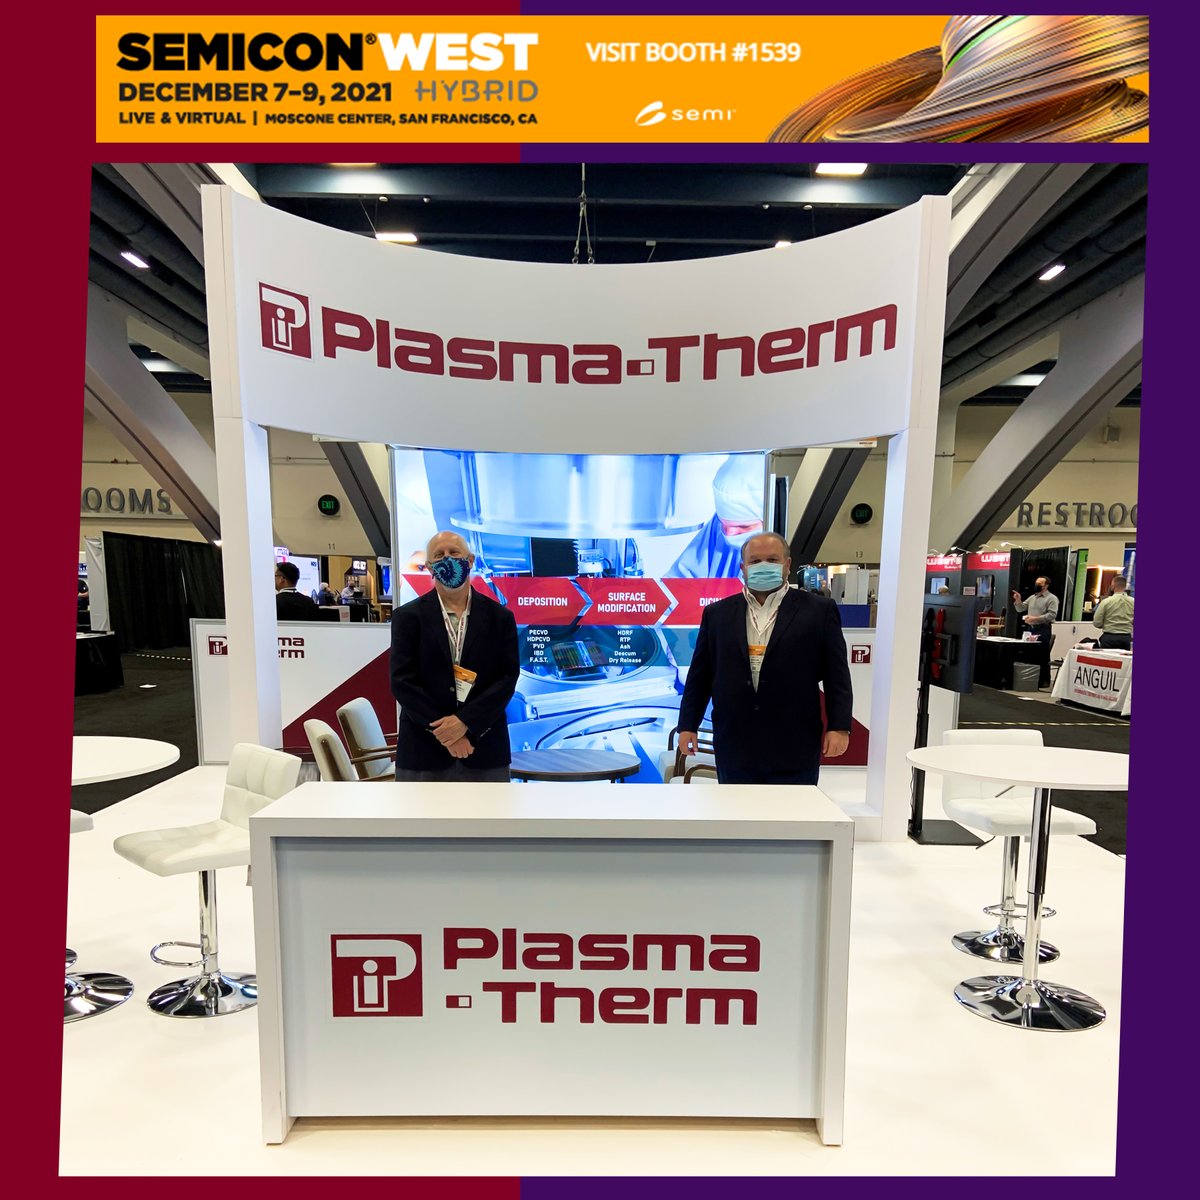 Visit us at #SEMICONWest at booth #1539 to learn about our #etch, deposition, #surfacemodification, & dicing solutions! hubs.la/Q010xd5N0
#PlasmaTherm #SEMICON #Semiconductor #SemiconductorIndustry #Semiconductors #PlasmaEtch #PECVD #HDPCVD #IonBeamEtch #ReactiveIonEtch